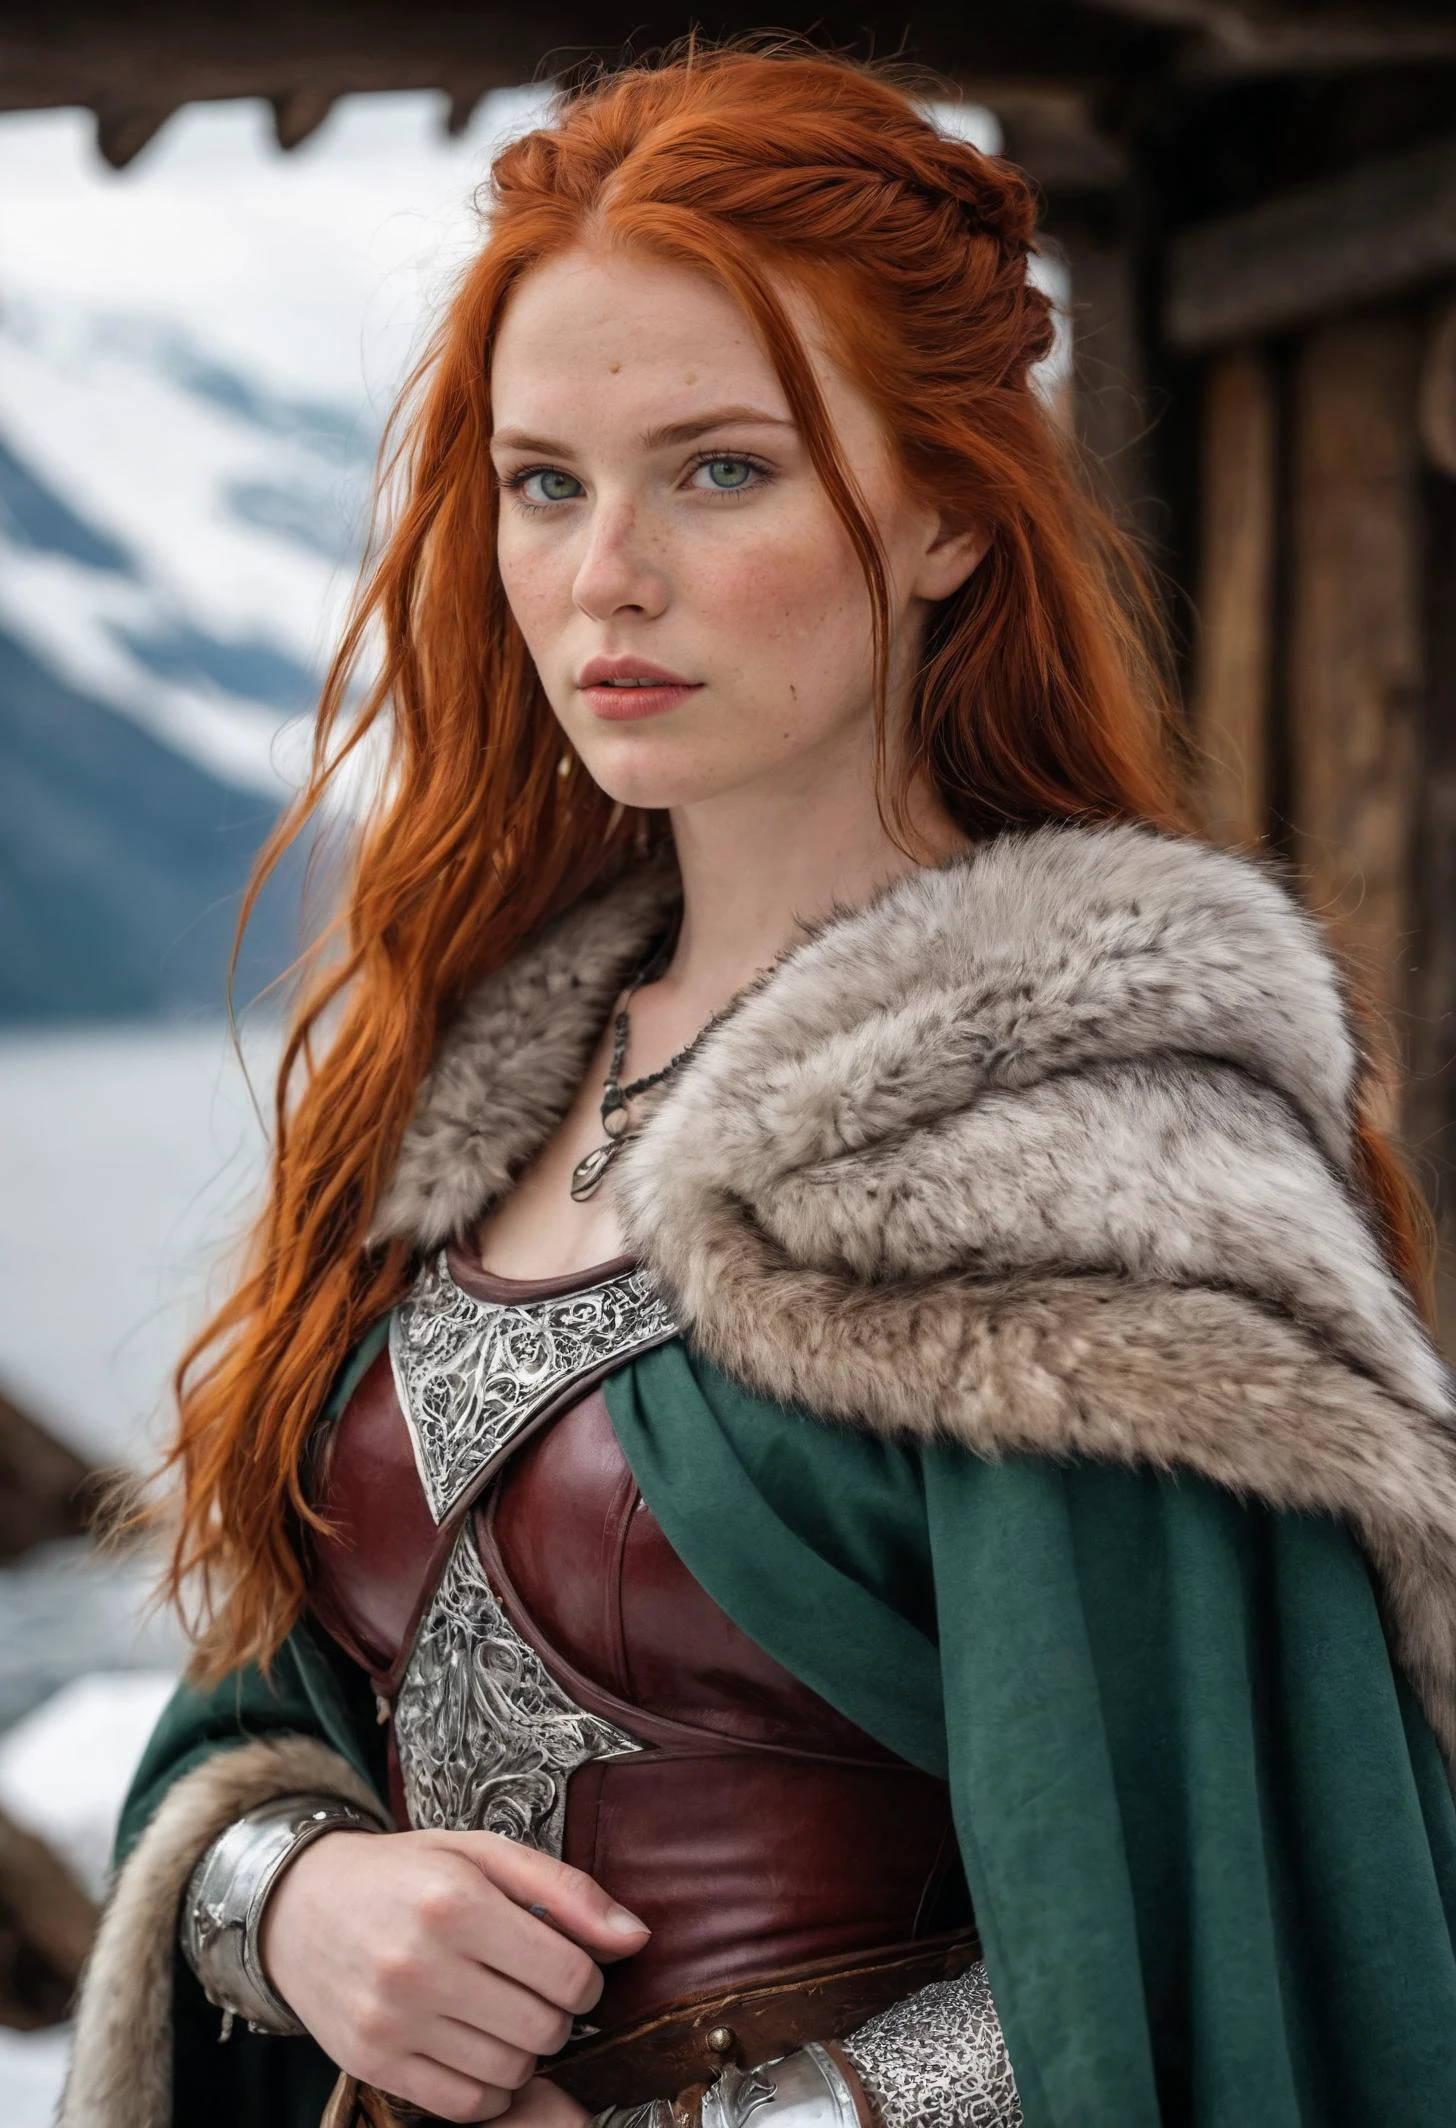 A warrior ((seductive under 18))  queen, a vision of strength and confidence. Fiery red hair cascades down her shoulders. Pale skin, etched with the resilience of the north, is dusted with a hint of freckles. Piercing green eyes sparkle with unwavering determination. Clad in sleek silver chainmail that accentuates her powerful form, she commands respect and admiration. A fur-lined cloak, the pelt of a mighty wolf, adds a touch of wildness to her regal presence. A Viking horn rests confidently in her hand, a symbol of leadership. The scene unfolds before a formidable Viking longhouse, a testament to her proud heritage. Snow-capped mountains rise majestically beside a majestic fjord, reflecting the fiery spirit in her eyes.